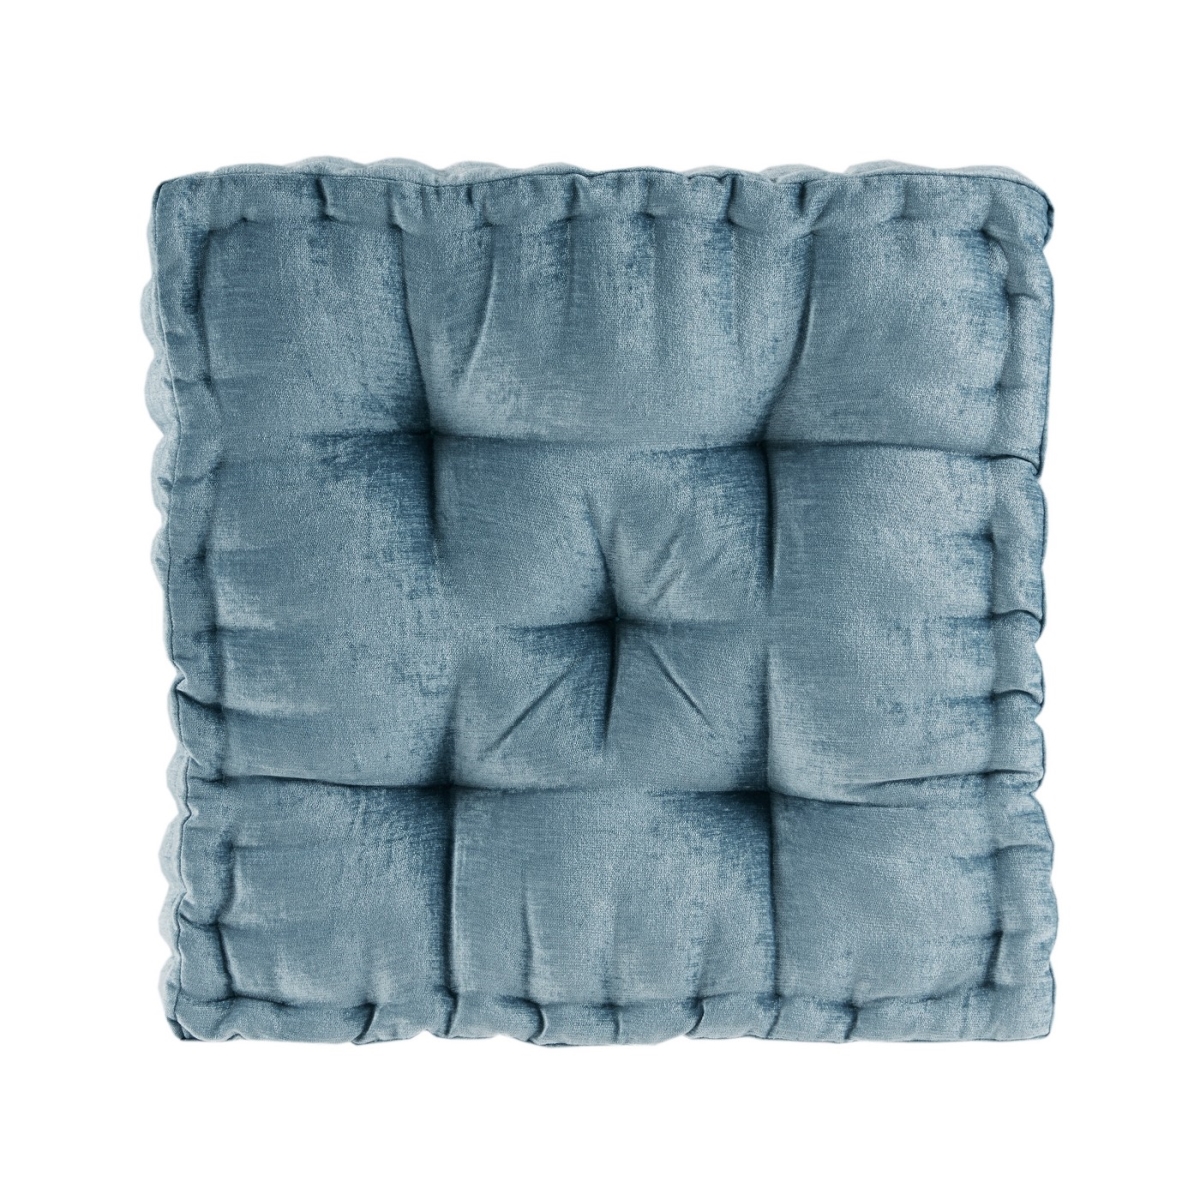 Picture of Intelligent Design ID31-1526 20 x 20 in. Poly Chenille Square Floor Pillow Cushion - Aqua